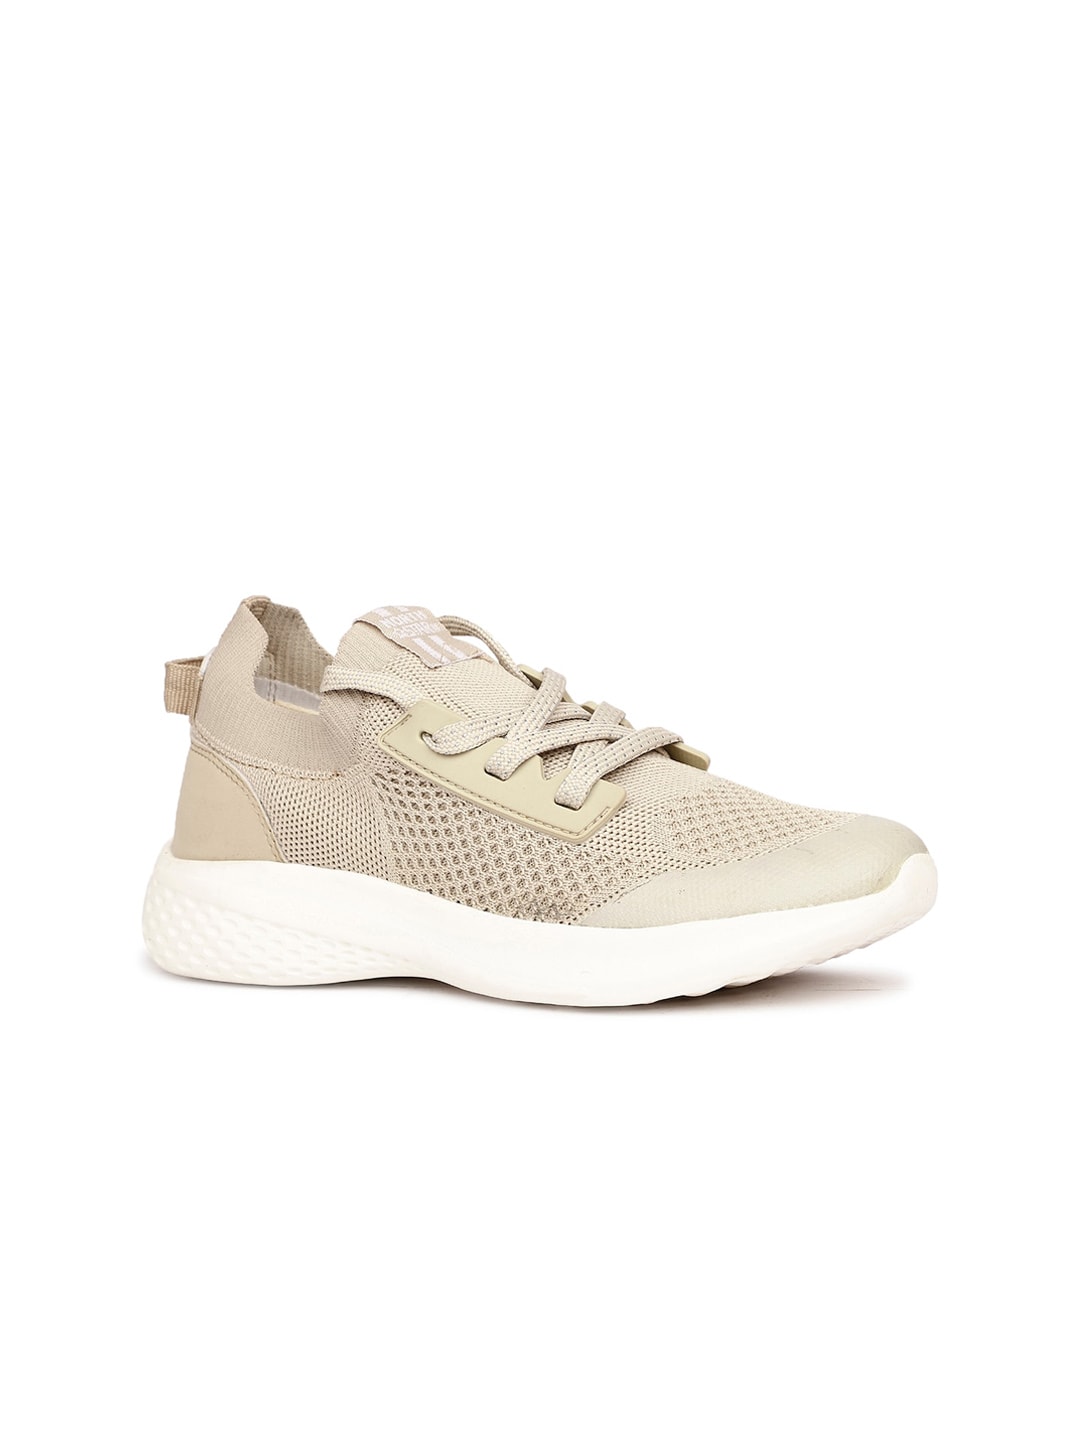 North Star Women Woven Design Sneakers Price in India